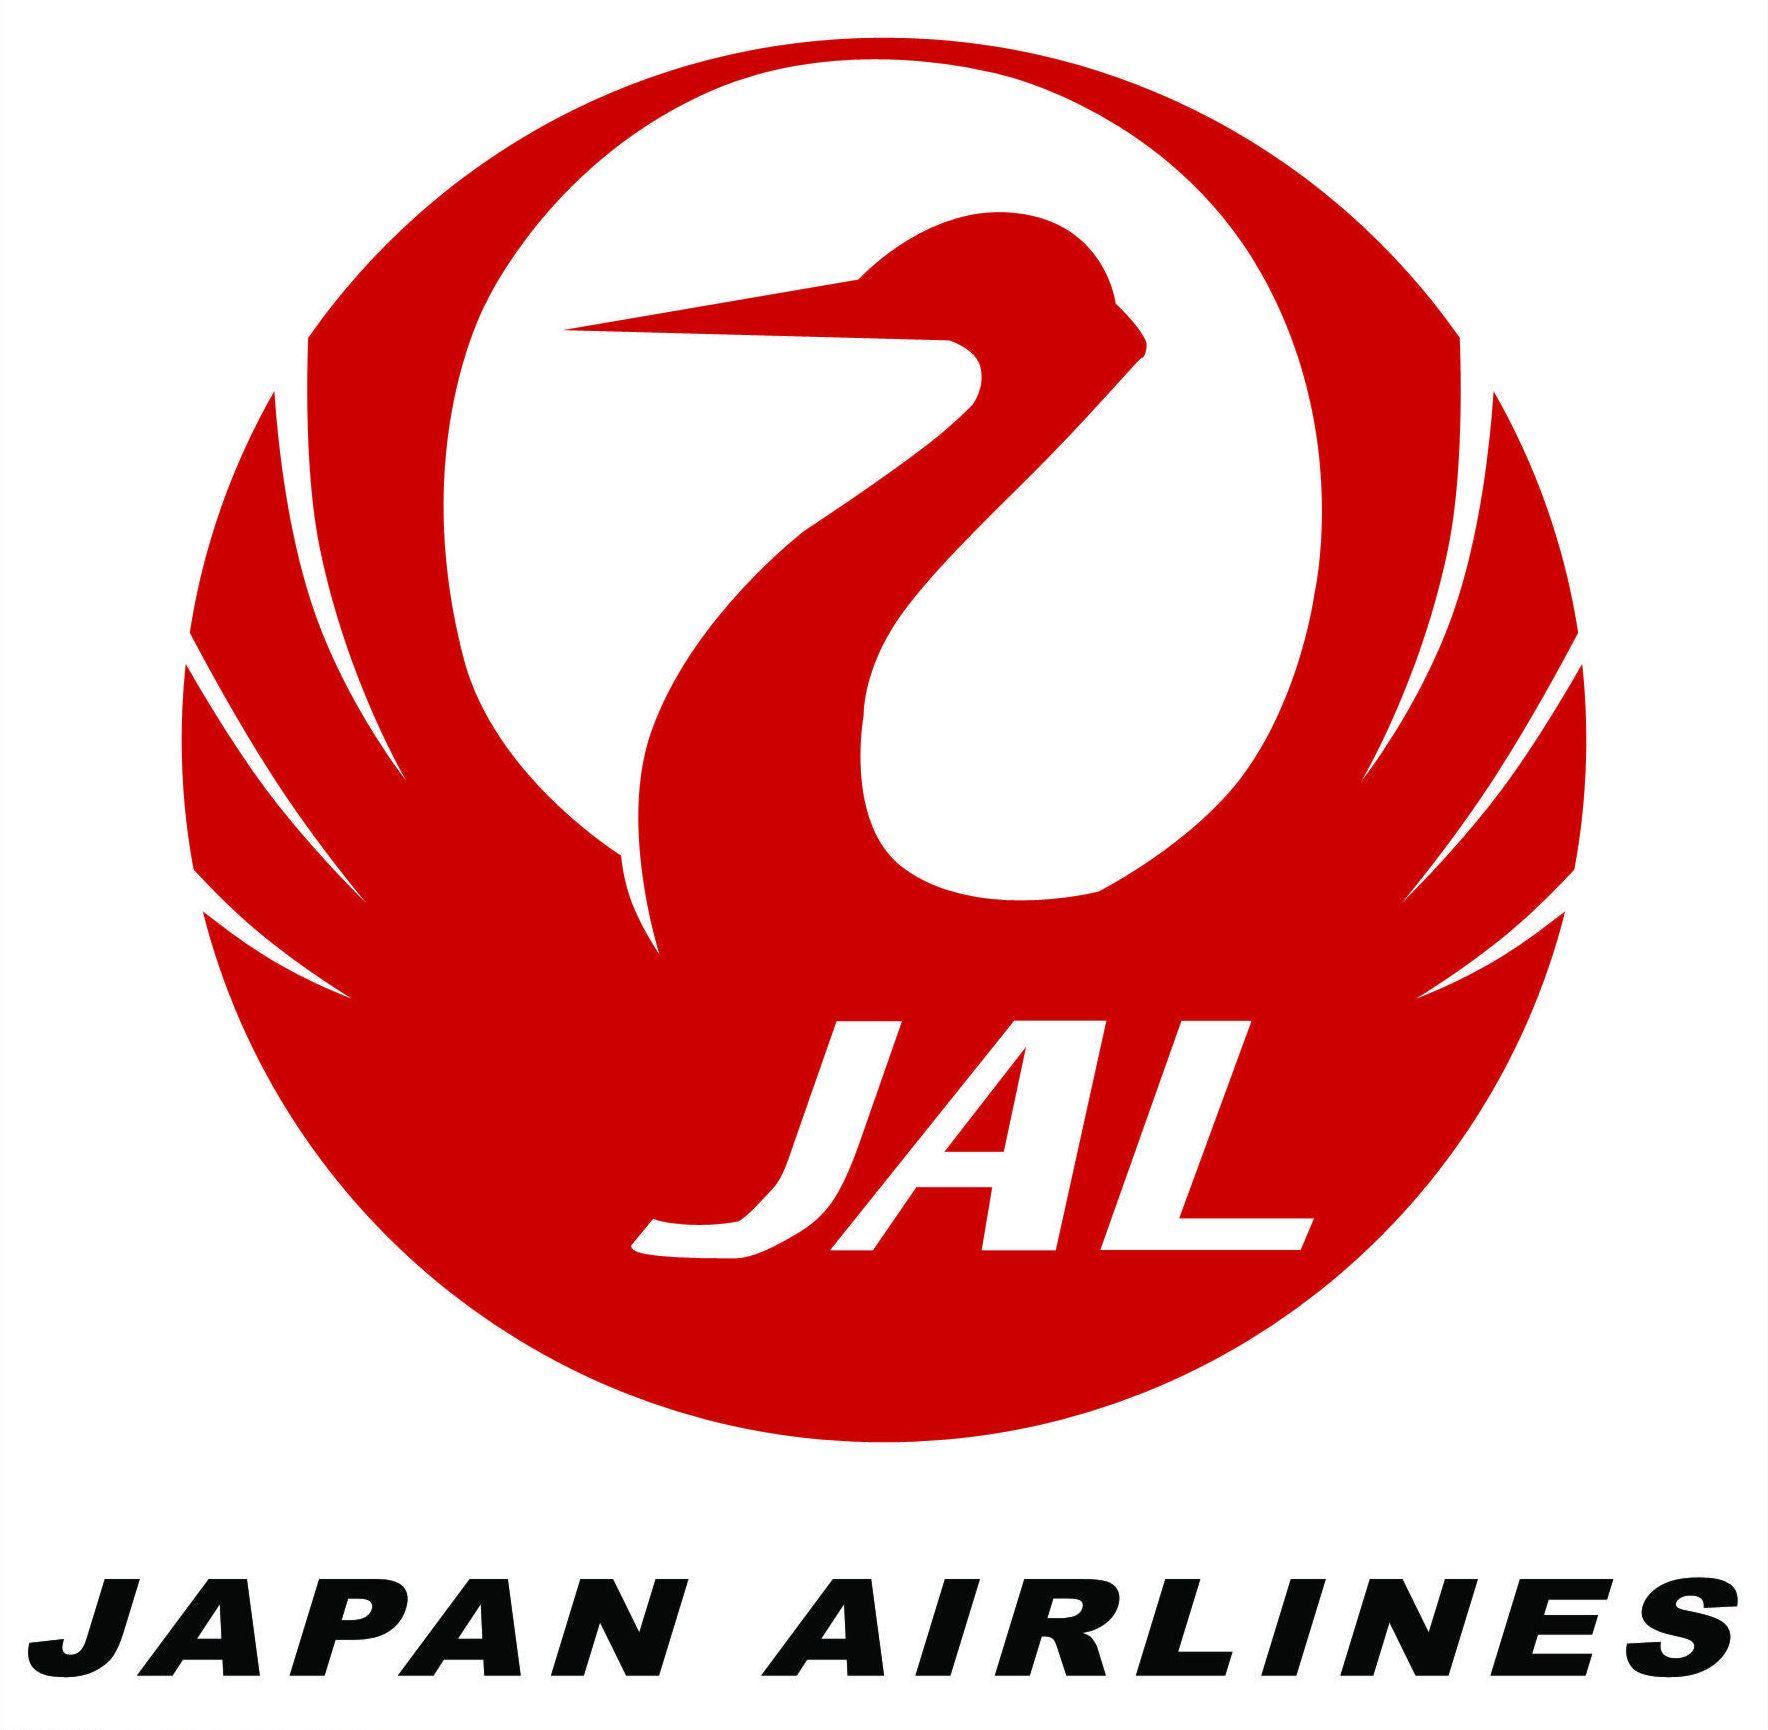 Red Circle Airline Logo - The official logo of Japan Airlines | I Love Japan!!! | Pinterest ...